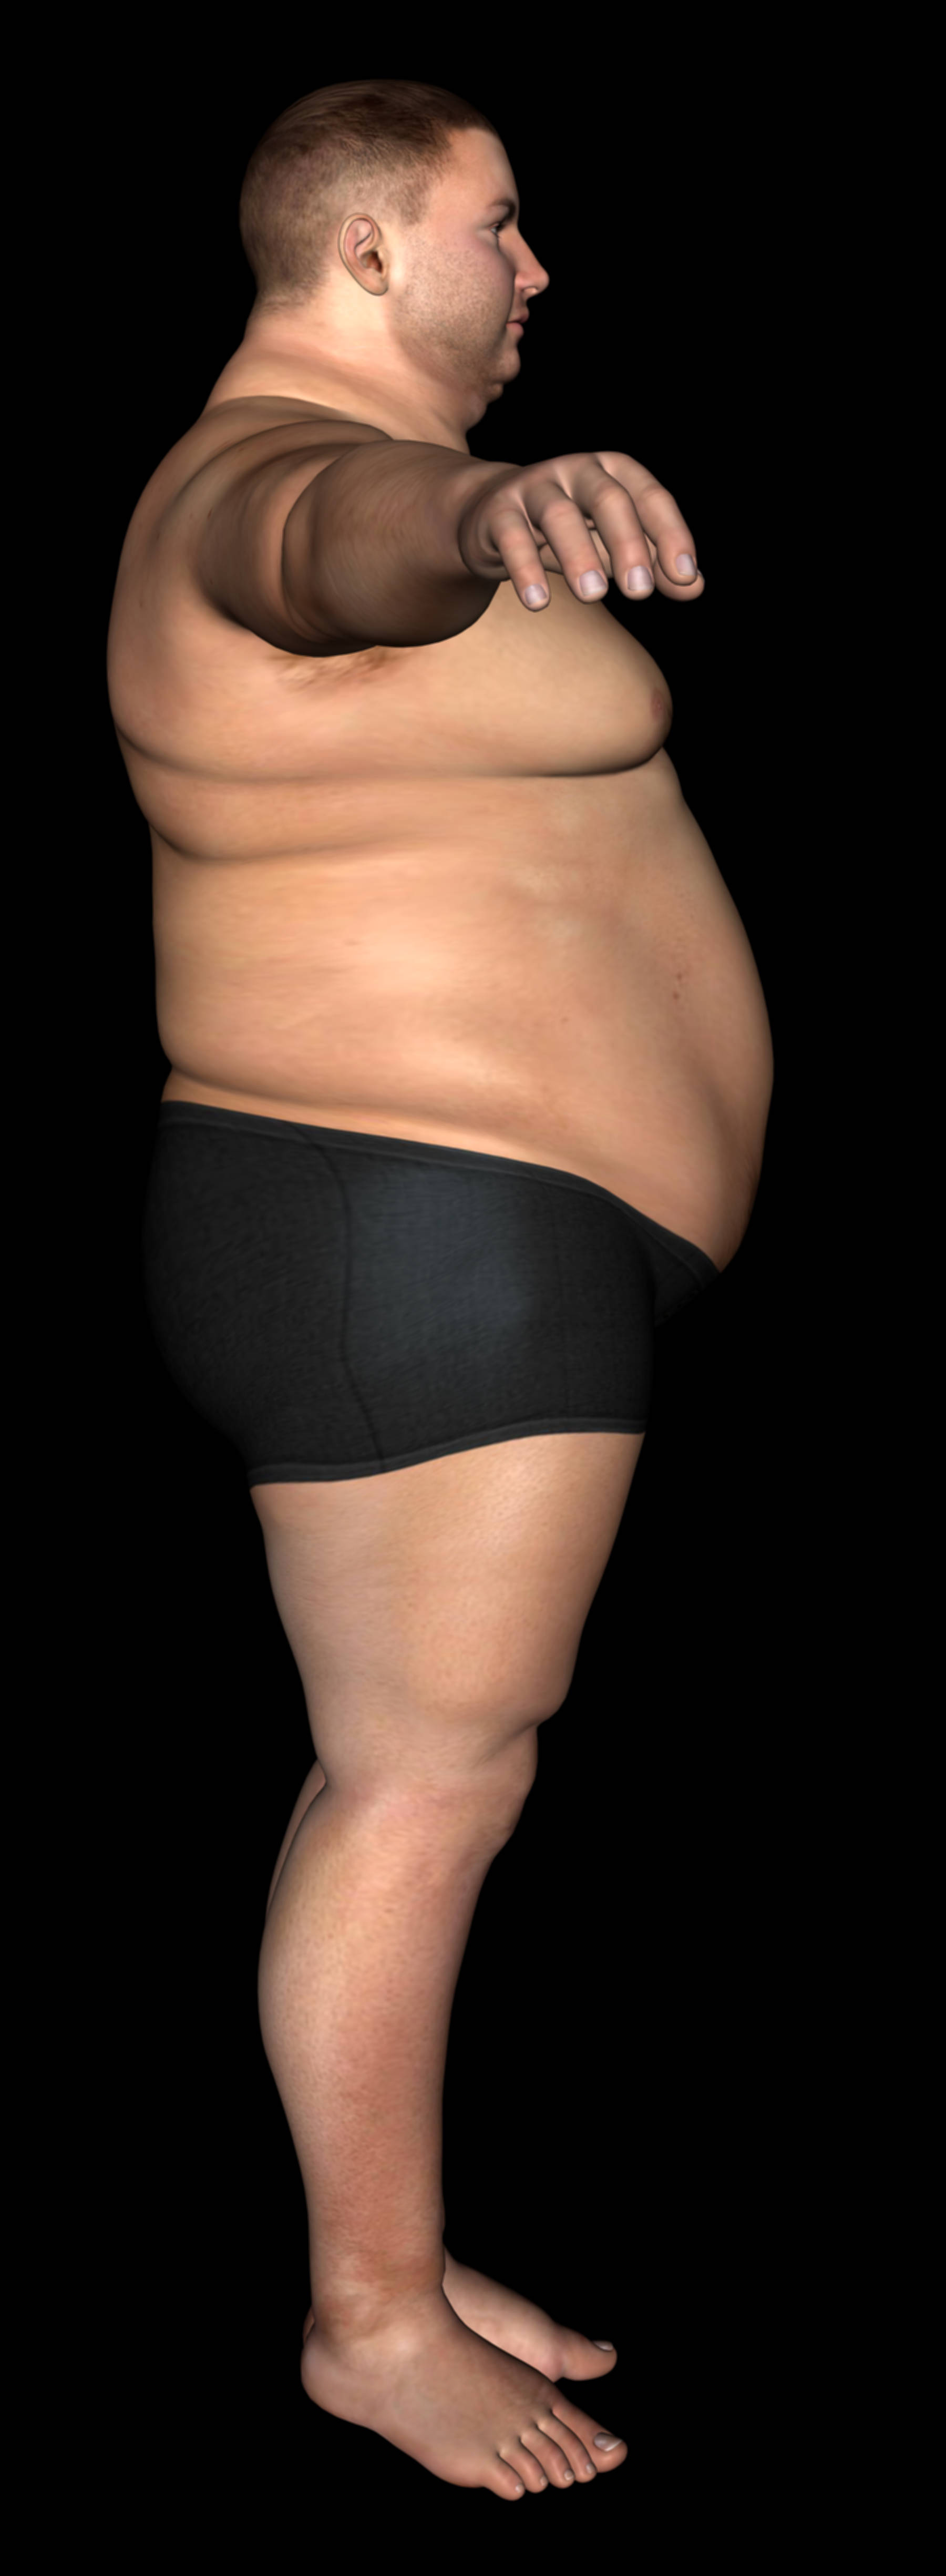 Before-Body lift - Post Bariatric Plastic Surgery